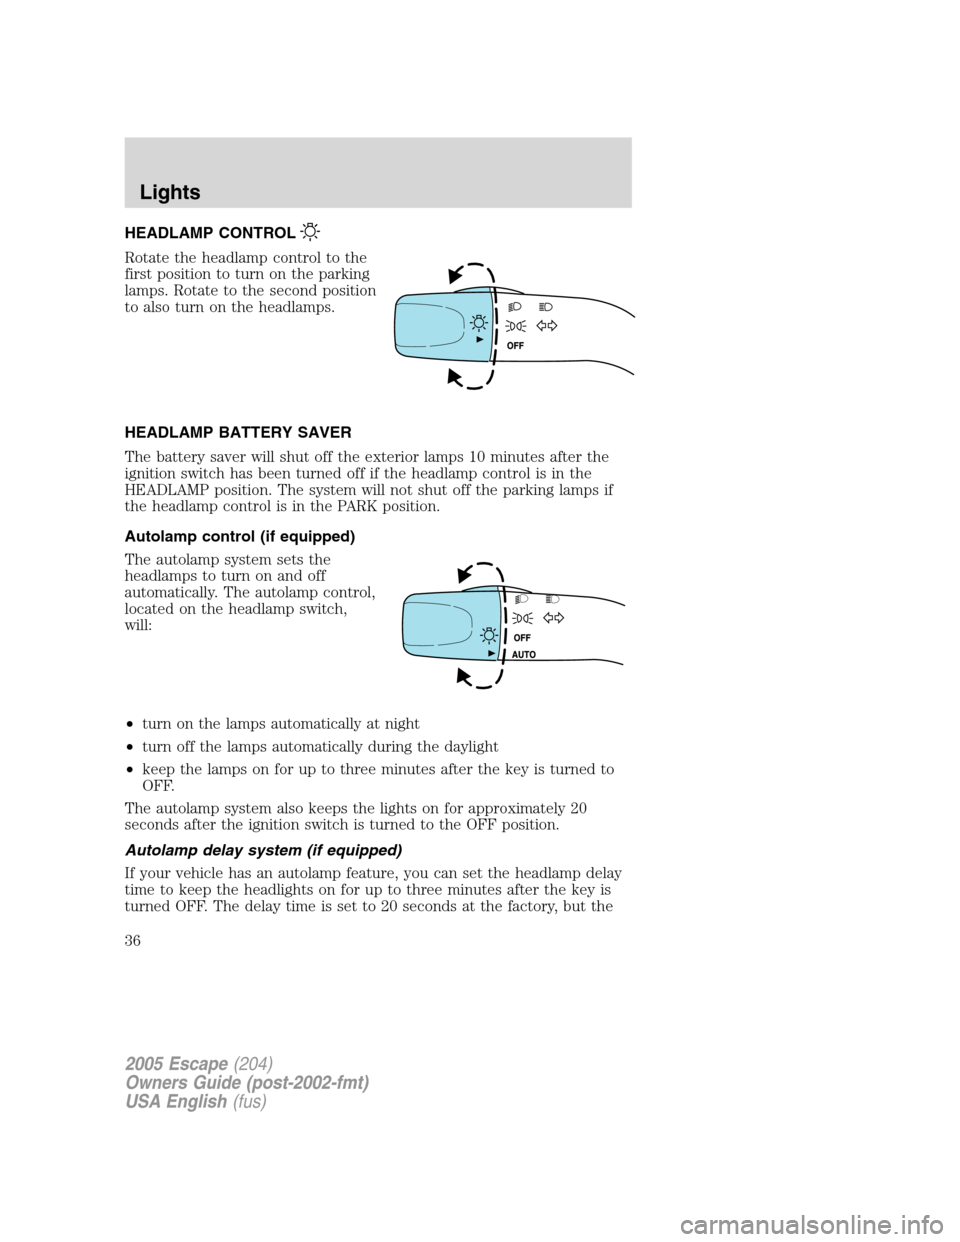 FORD ESCAPE 2005 1.G Owners Guide HEADLAMP CONTROL
Rotate the headlamp control to the
first position to turn on the parking
lamps. Rotate to the second position
to also turn on the headlamps.
HEADLAMP BATTERY SAVER
The battery saver w